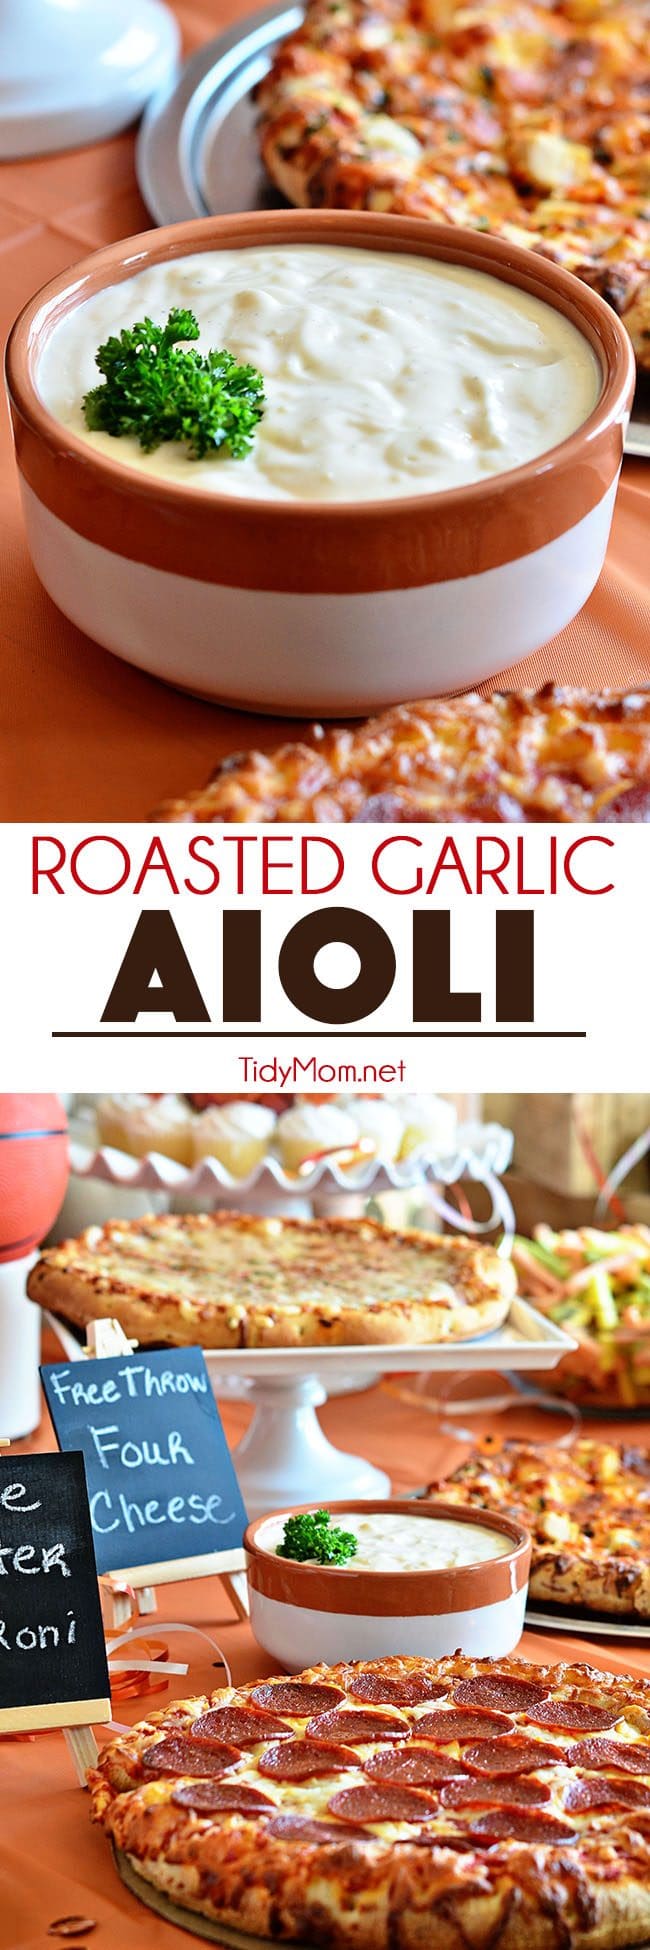 Serve ROASTED GARLIC AIOLI along side, pizza, french fries, veggies and so much more! Aioli recipe and basketball pizza party details at TidyMom.net